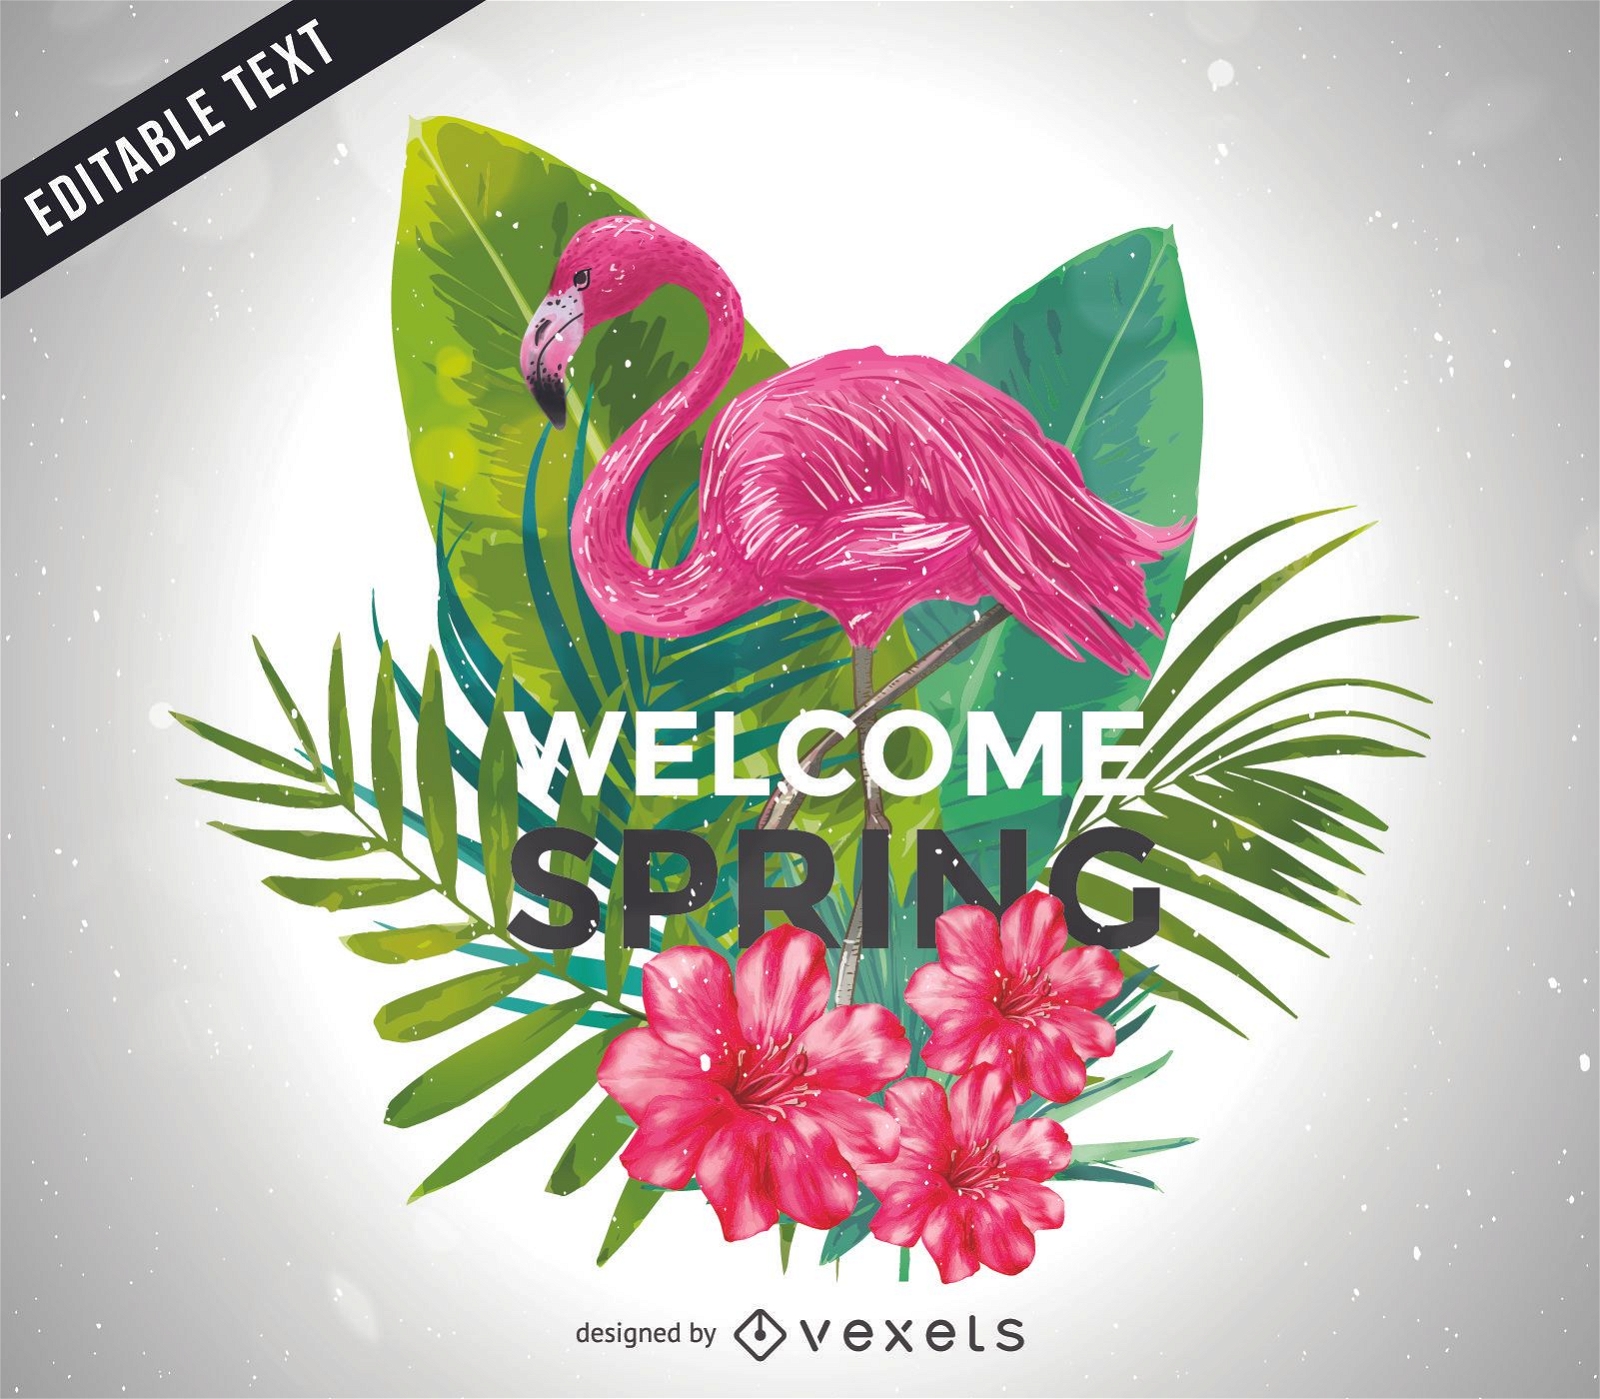 Welcome Spring illustration with flamingo